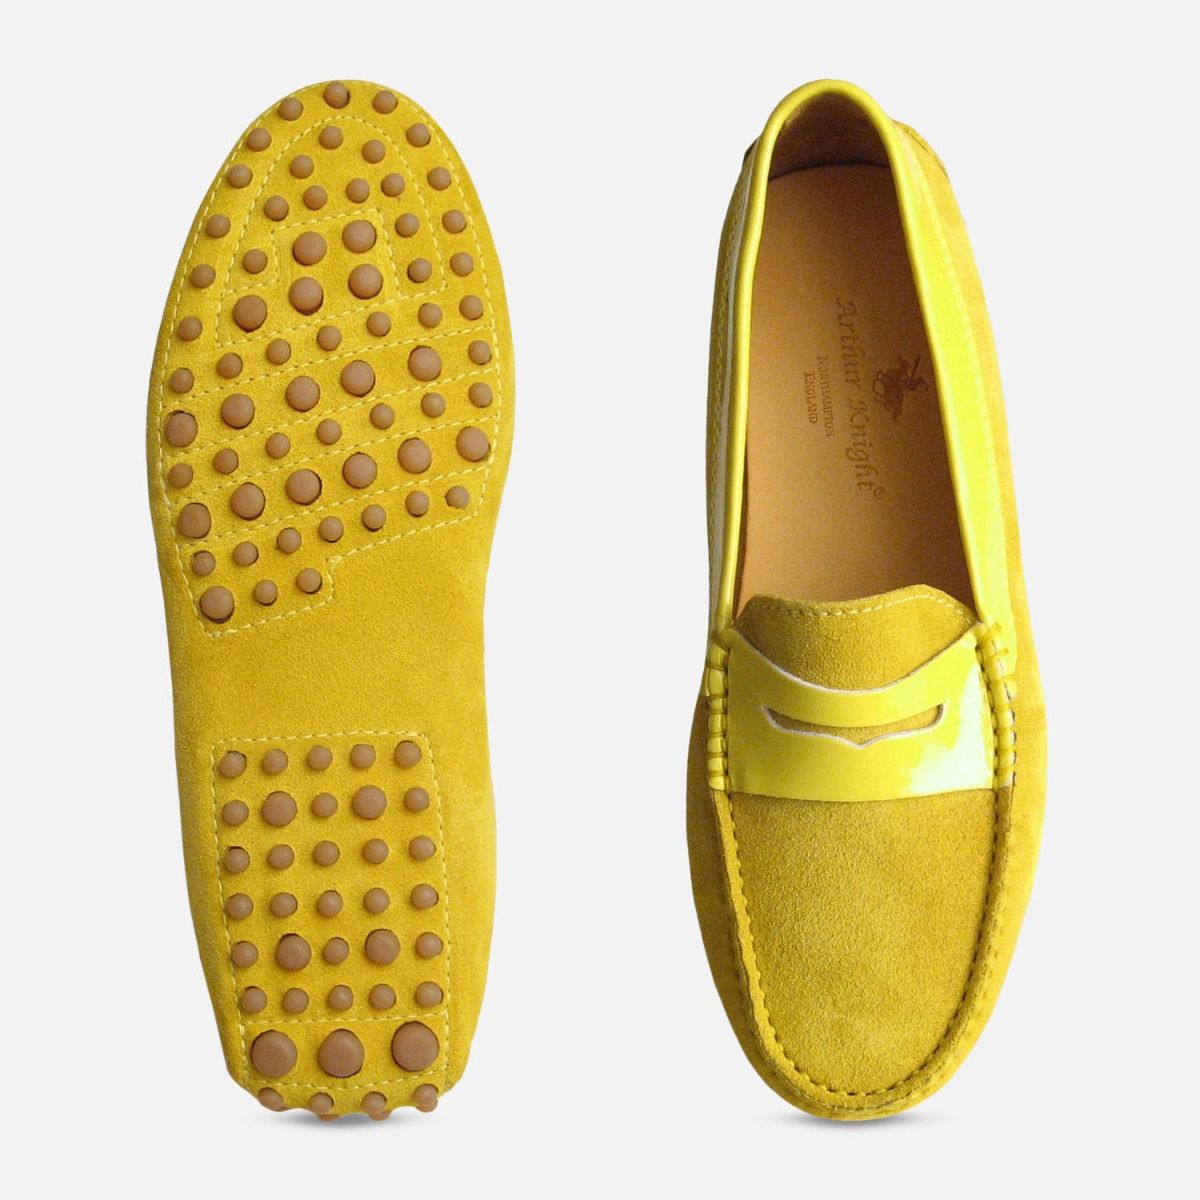 yellow suede shoes womens